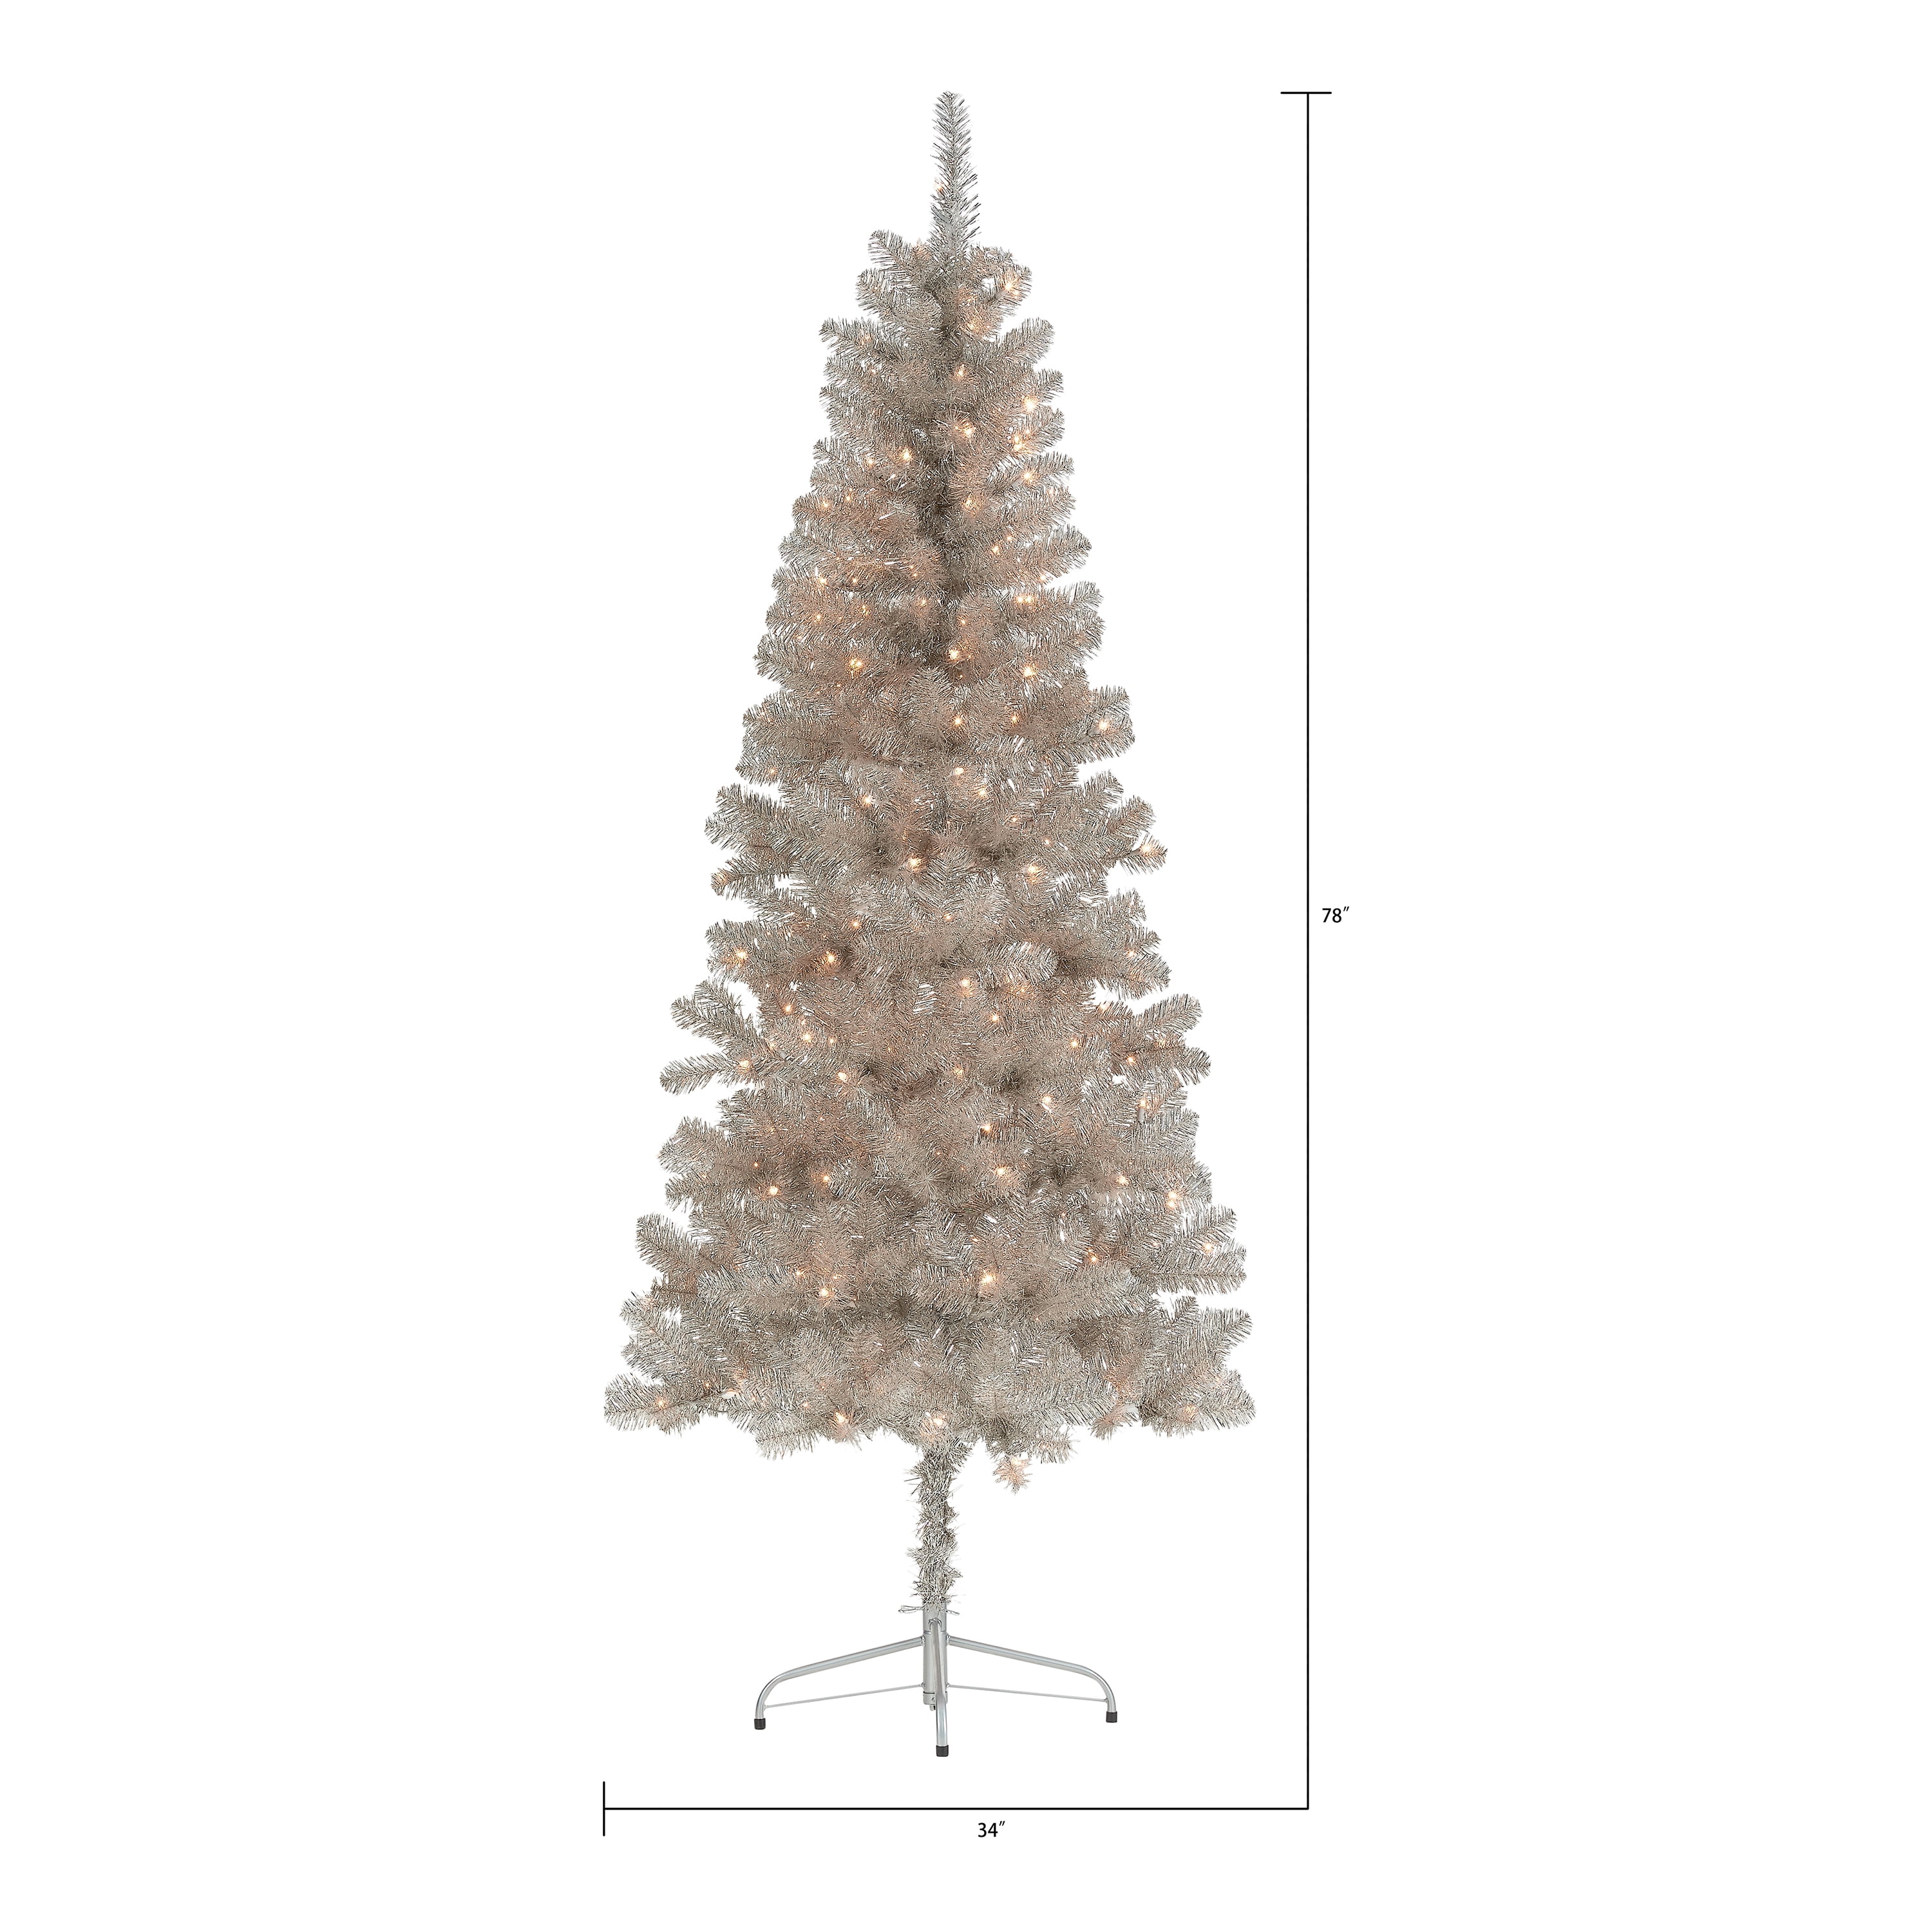 HOLIDAY TIME ROSE GOLD TINSEL CHRISTMAS TREE 4 FOOT PRE-LIT 50 LIGHTS SILVER